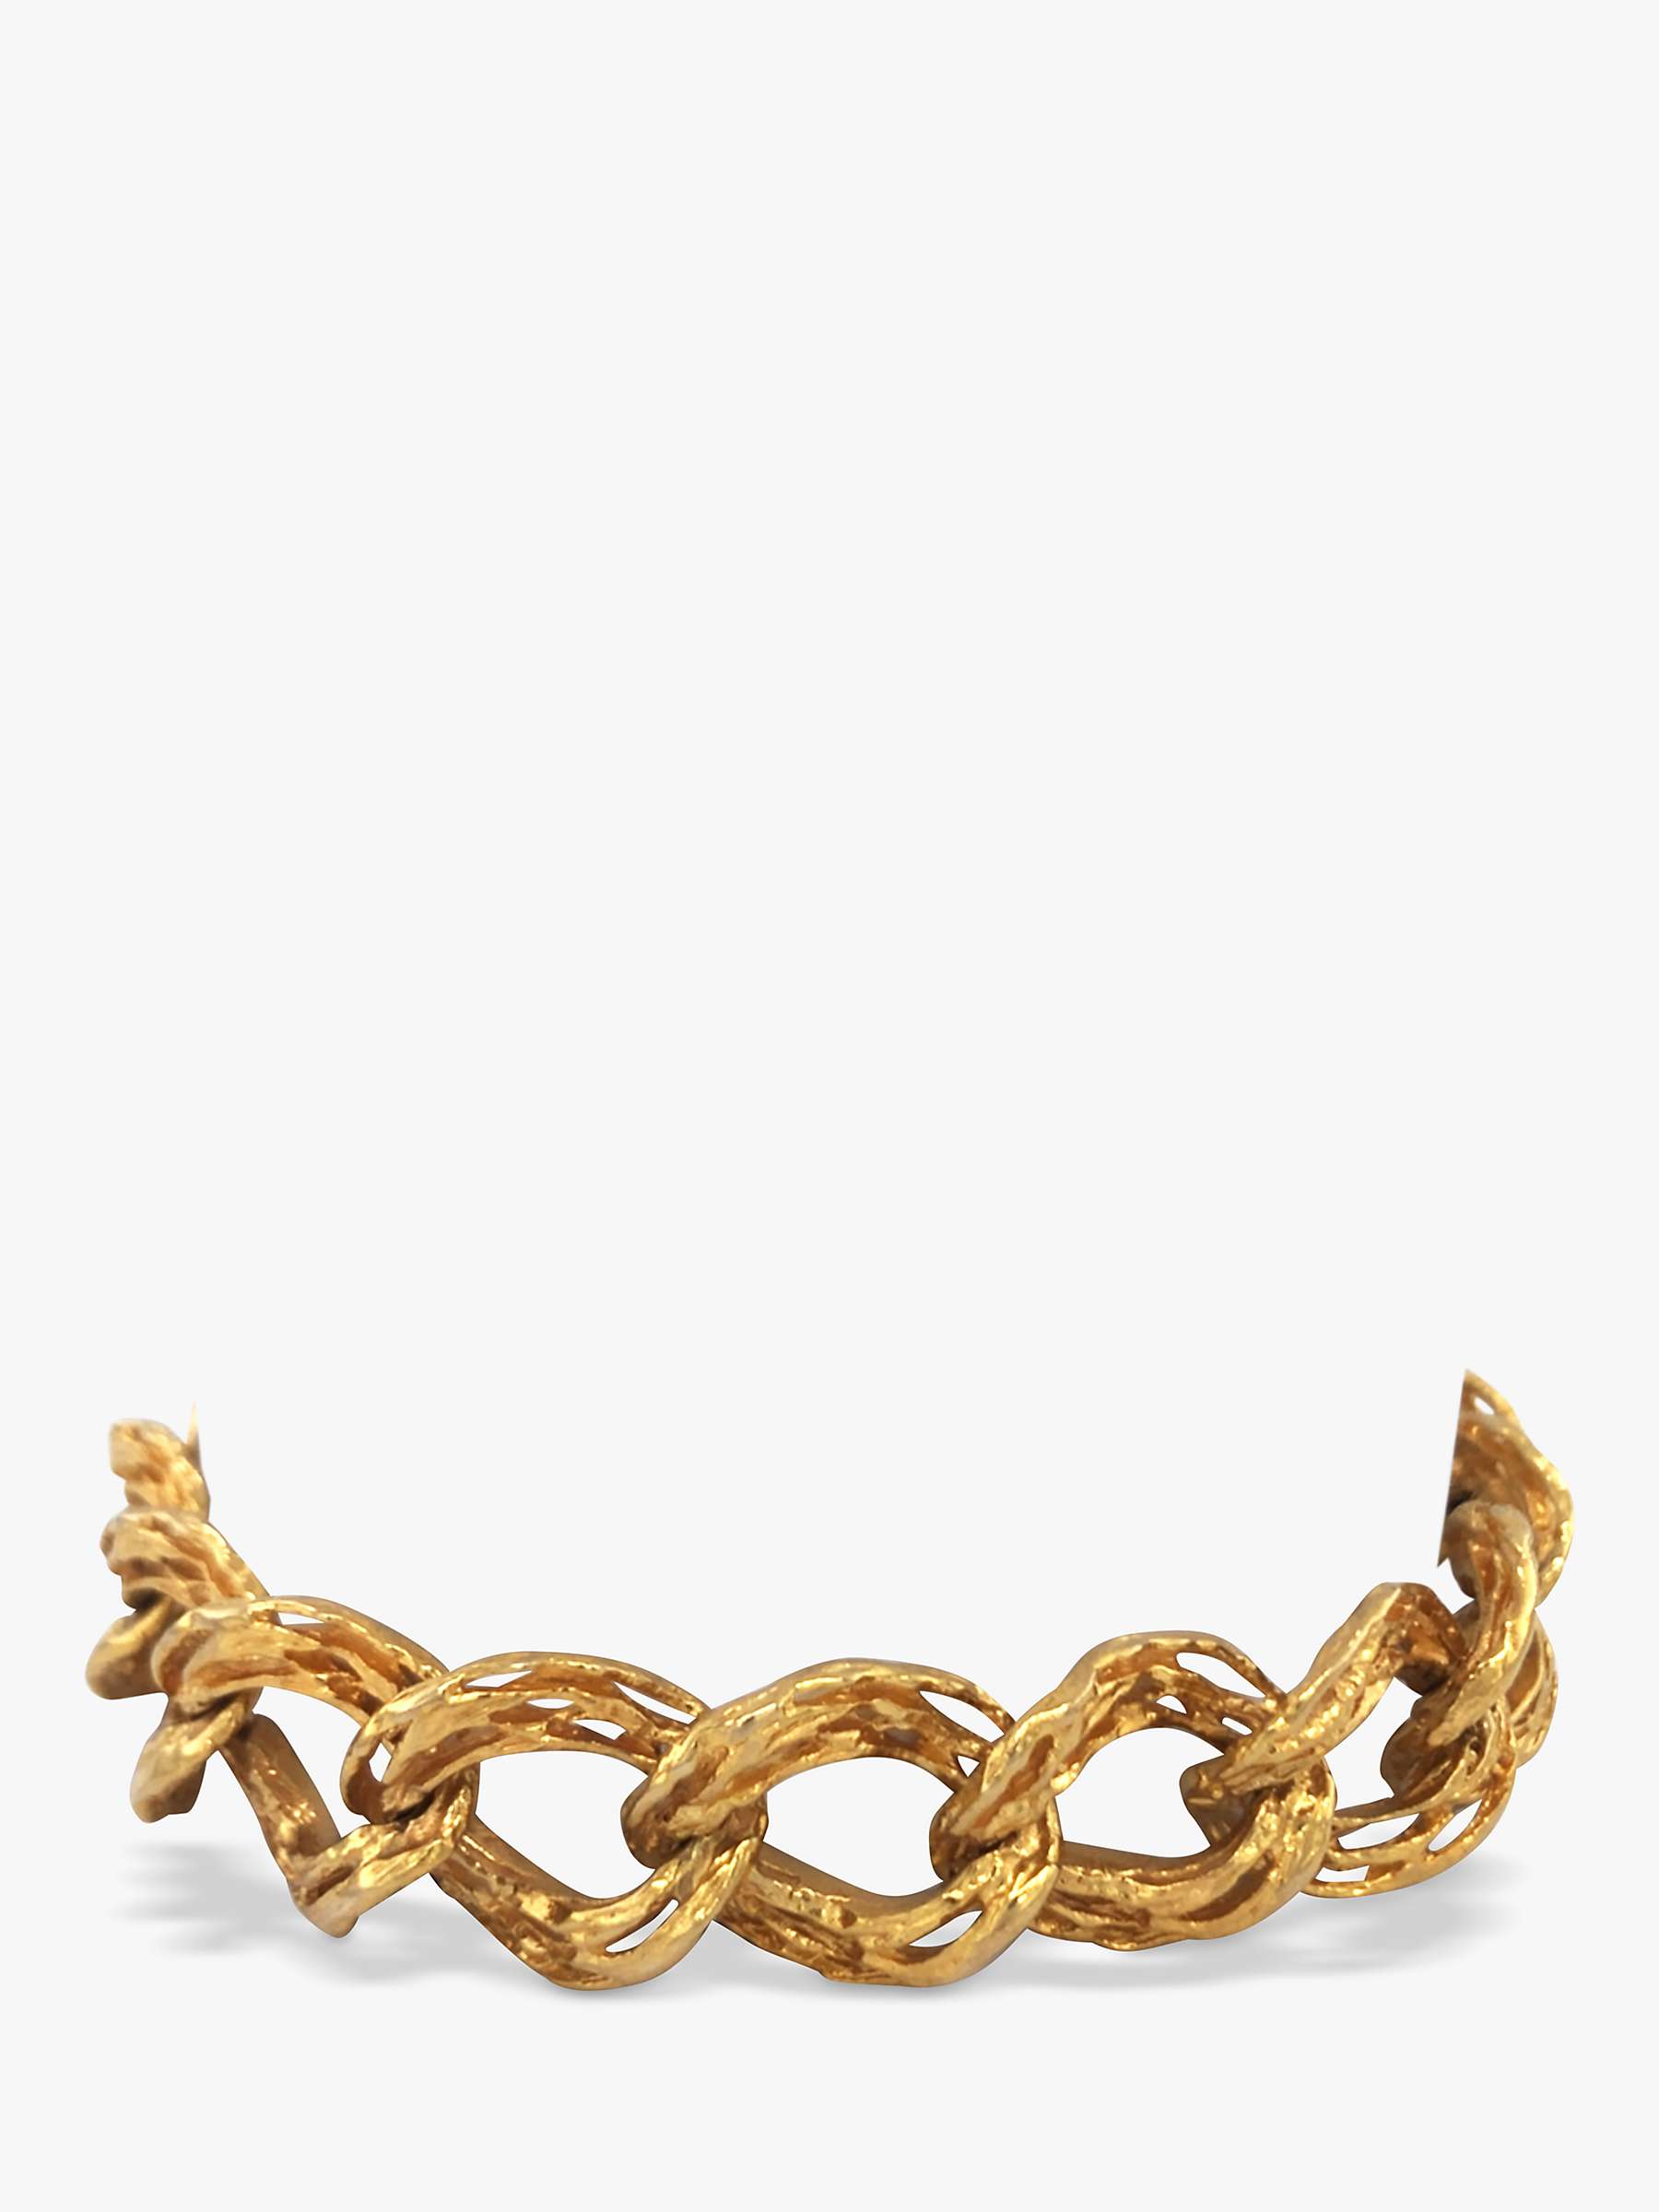 Buy Vintage Fine Jewellery Second Hand 9ct Yellow Gold Fancy Curb Link Bracelet, Dated London 1977 Online at johnlewis.com